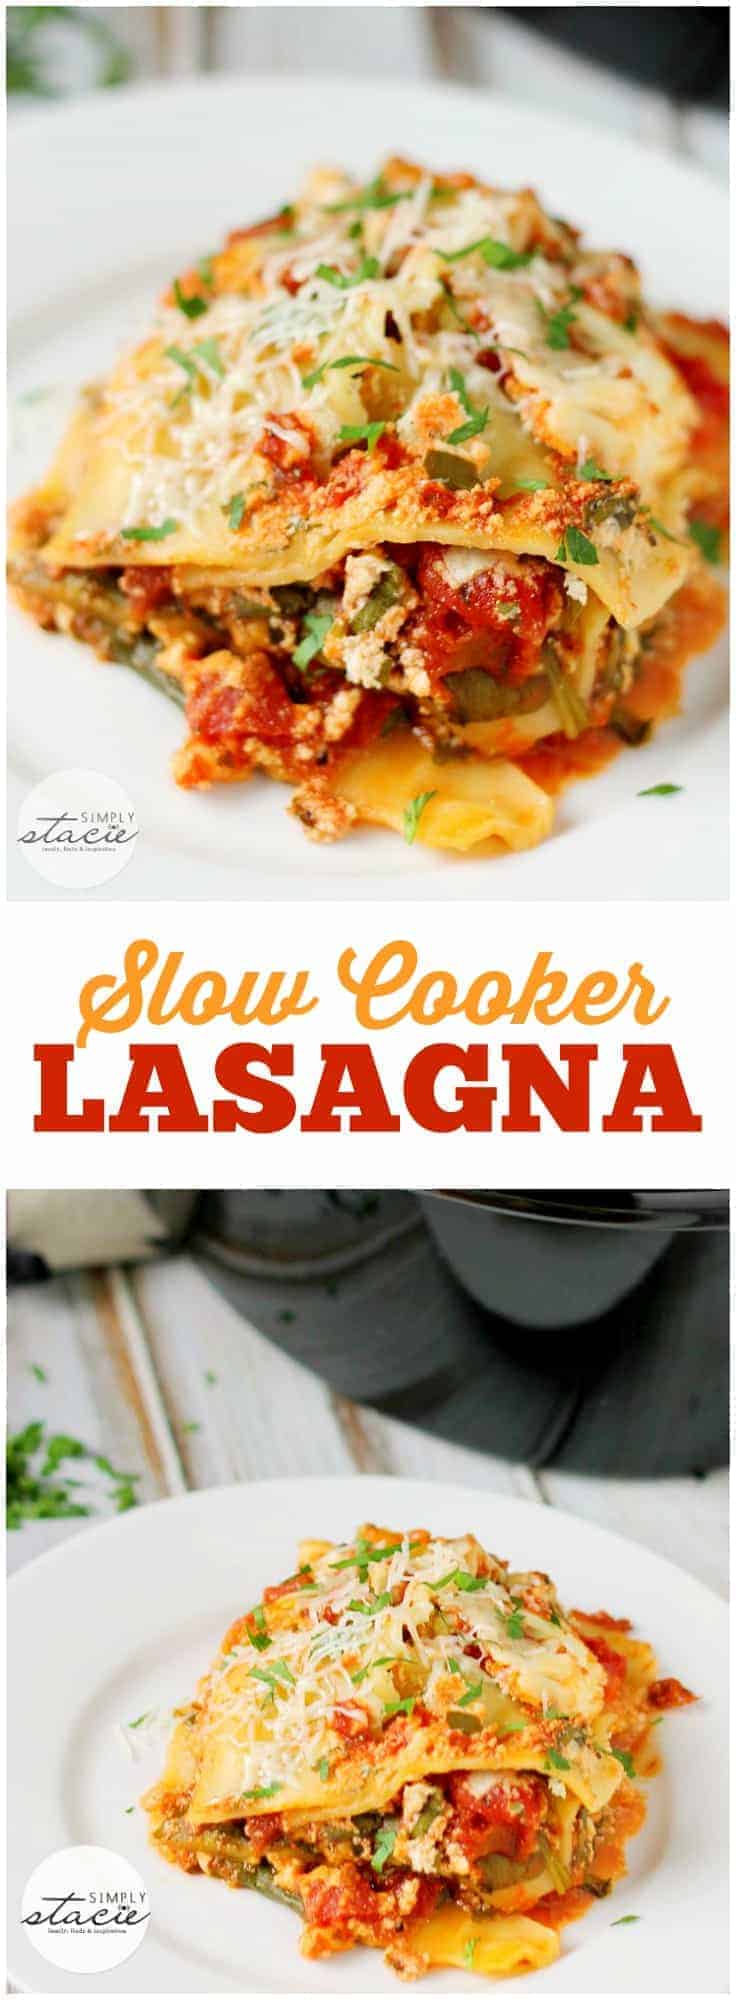 Slow Cooker Lasagna - The easiest way to make lasagna! Try this meatless lasagna recipe in the Crockpot with spinach, ricotta cheese, tomatoes, and mozzarella for the cheesiest pasta.